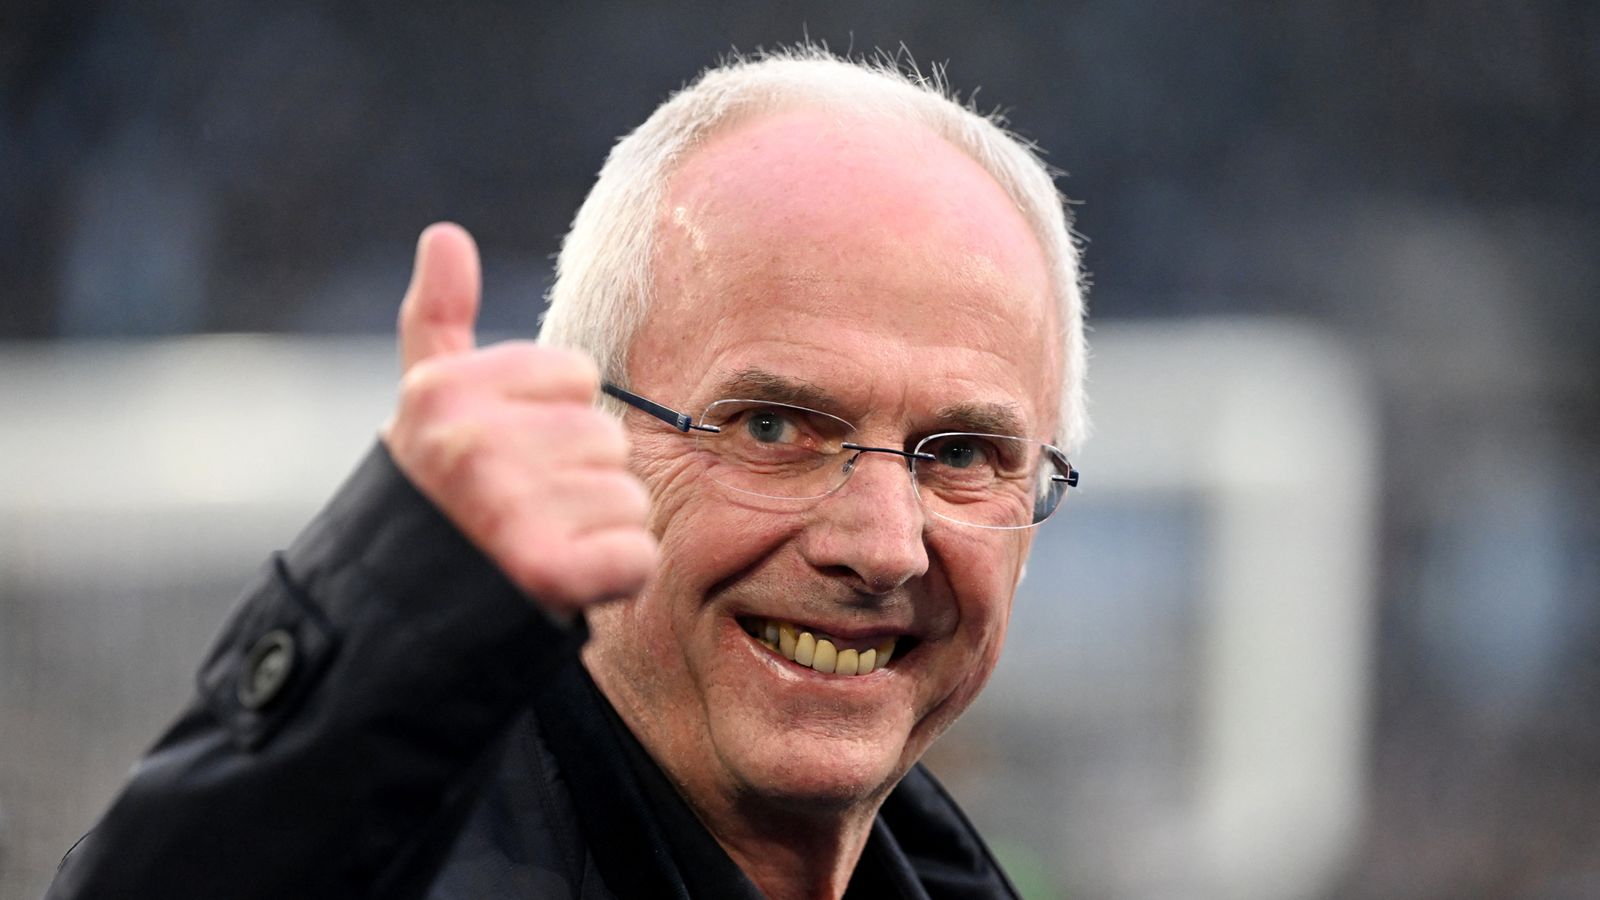 Former England manager Sven-Goran Eriksson to fulfill dream of managing Liverpool amid cancer battle